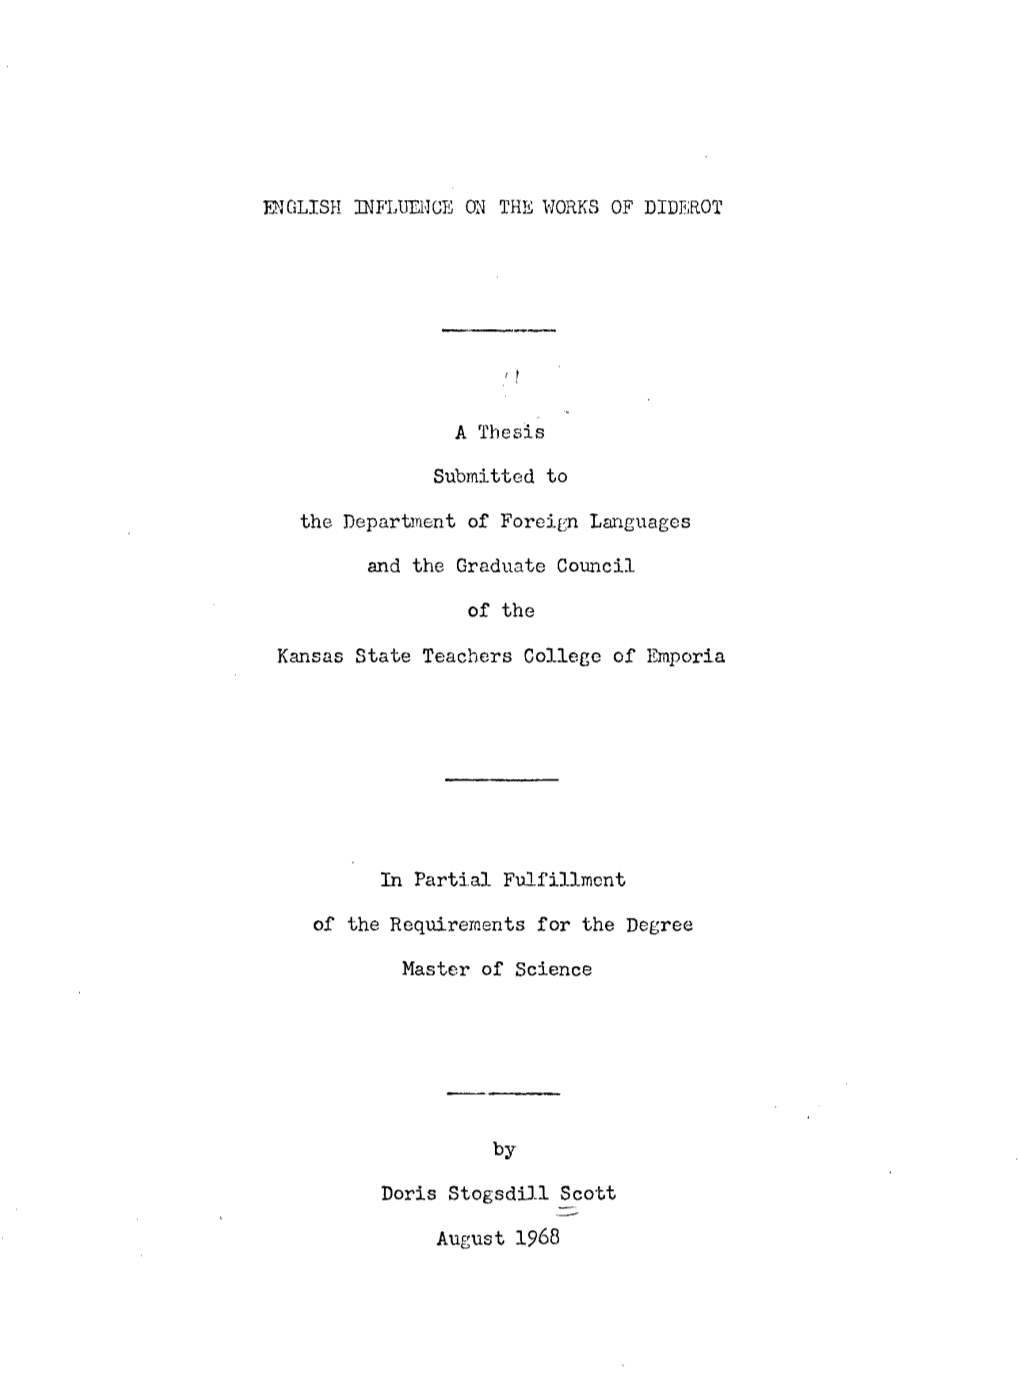 A Thesis Submitted to the Department of Fore:I.En Languages and The